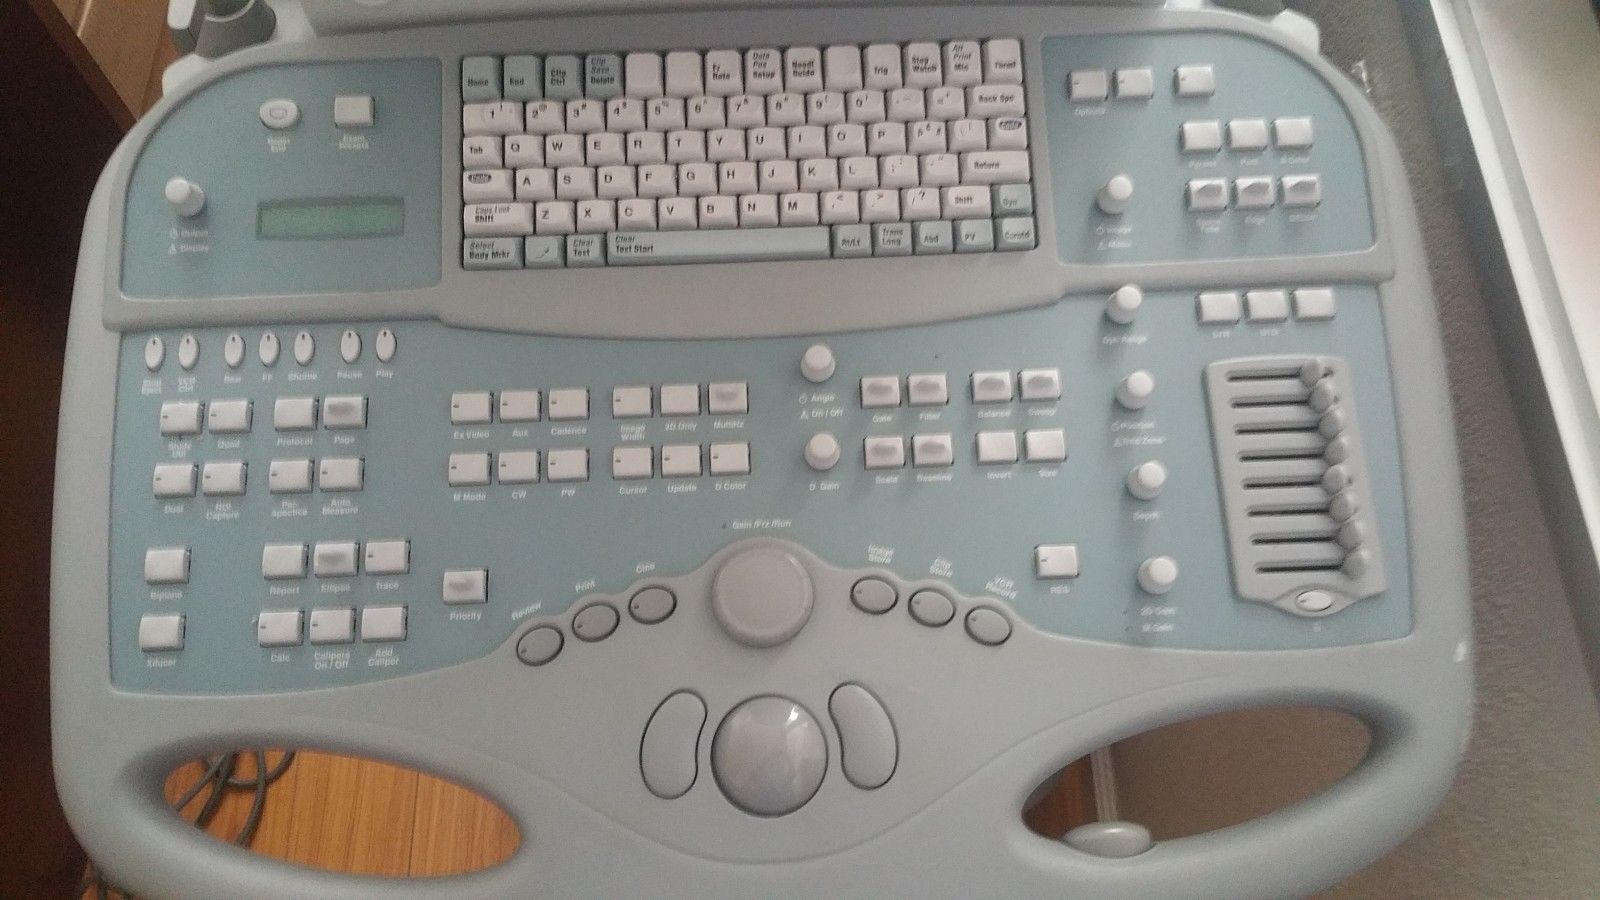 Acuson Sequoia 512 Ultrasound with 4 Probes DIAGNOSTIC ULTRASOUND MACHINES FOR SALE